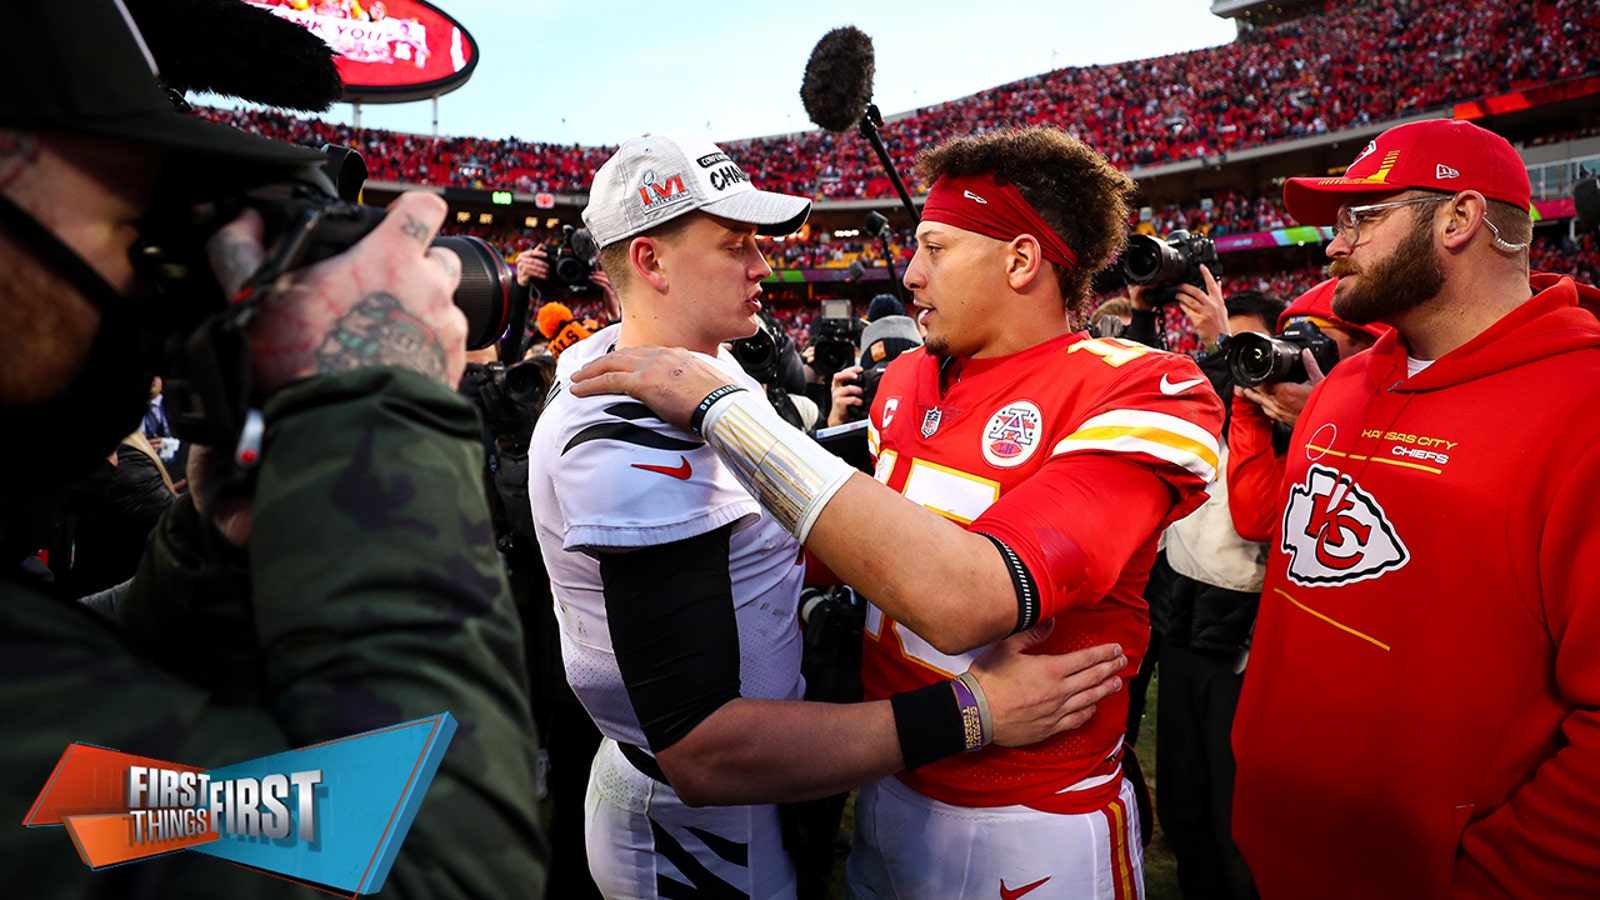 Joe Burrow is undefeated against Patrick Mahomes, what would another win mean for the Bengals QB?